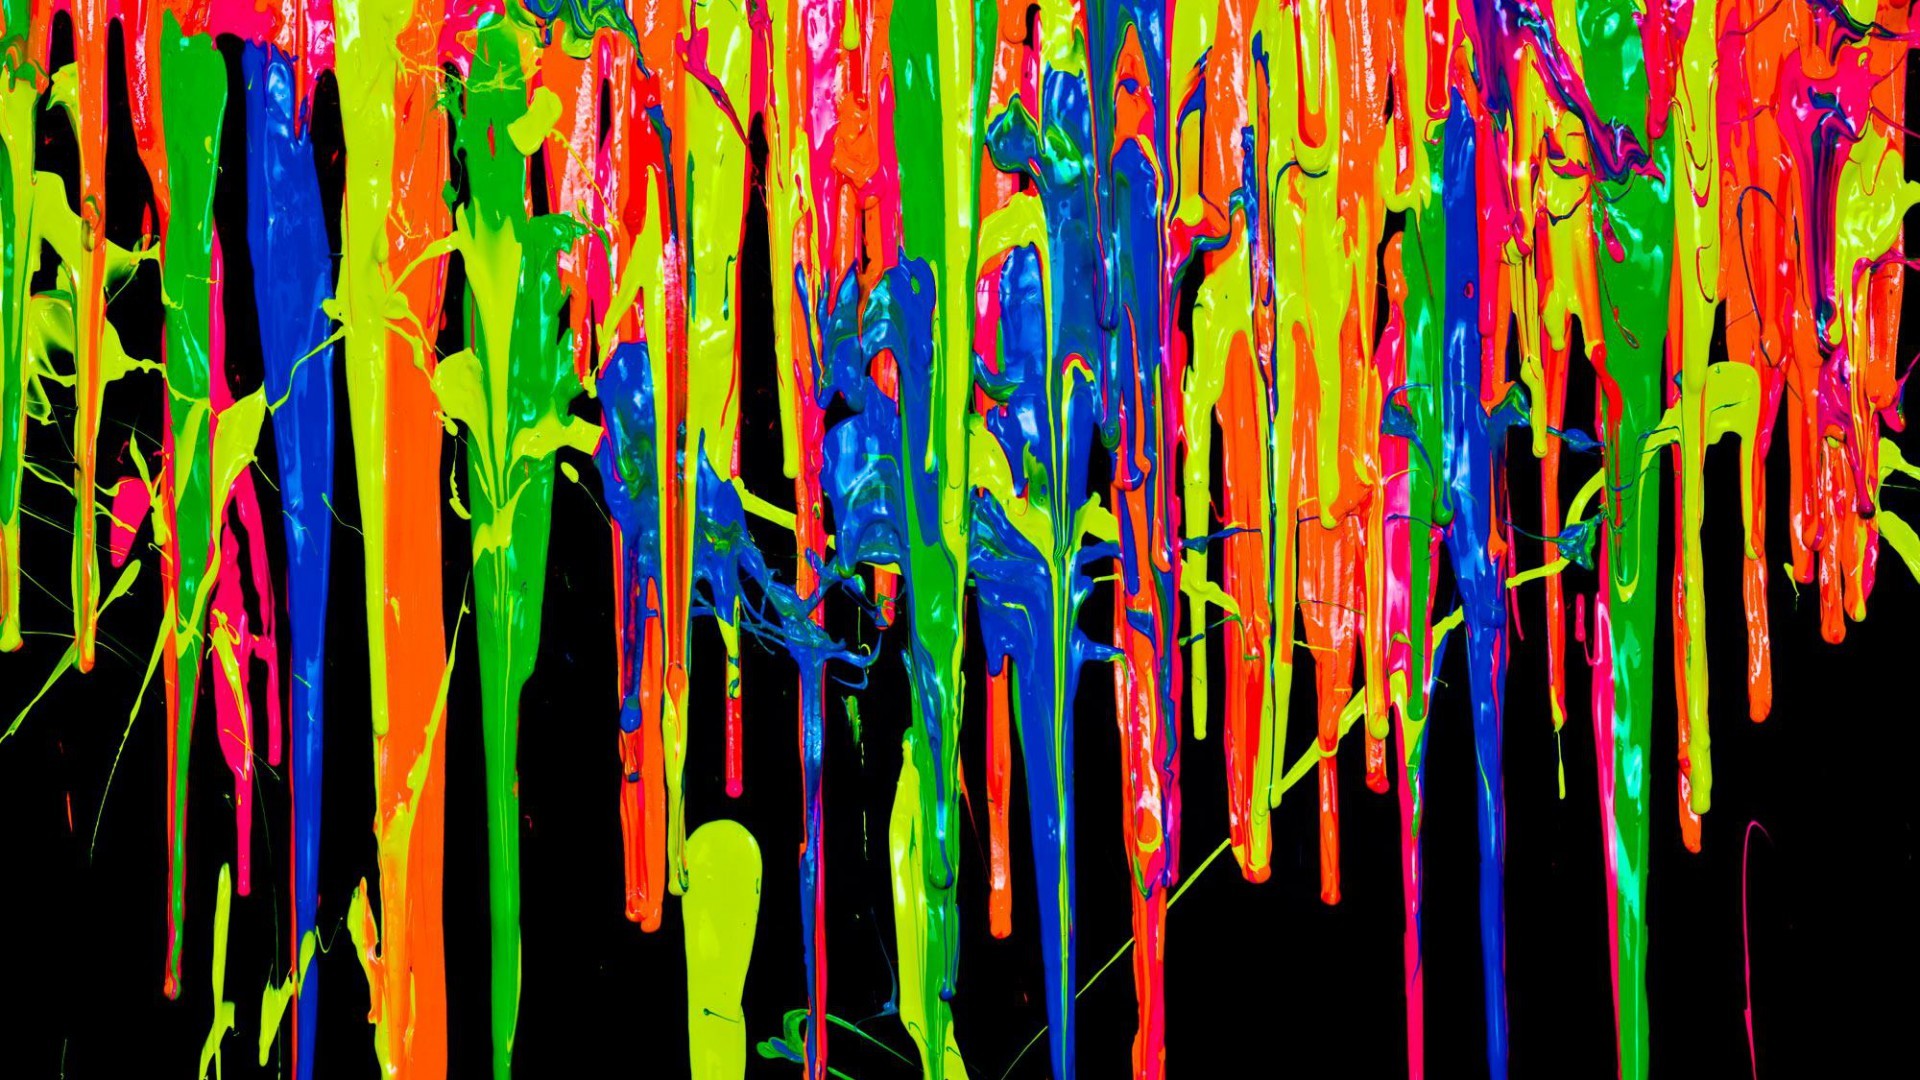 Wallpaper Dark Colorful Desktop with high-resolution 1920x1080 pixel. You can use this wallpaper for your Windows and Mac OS computers as well as your Android and iPhone smartphones